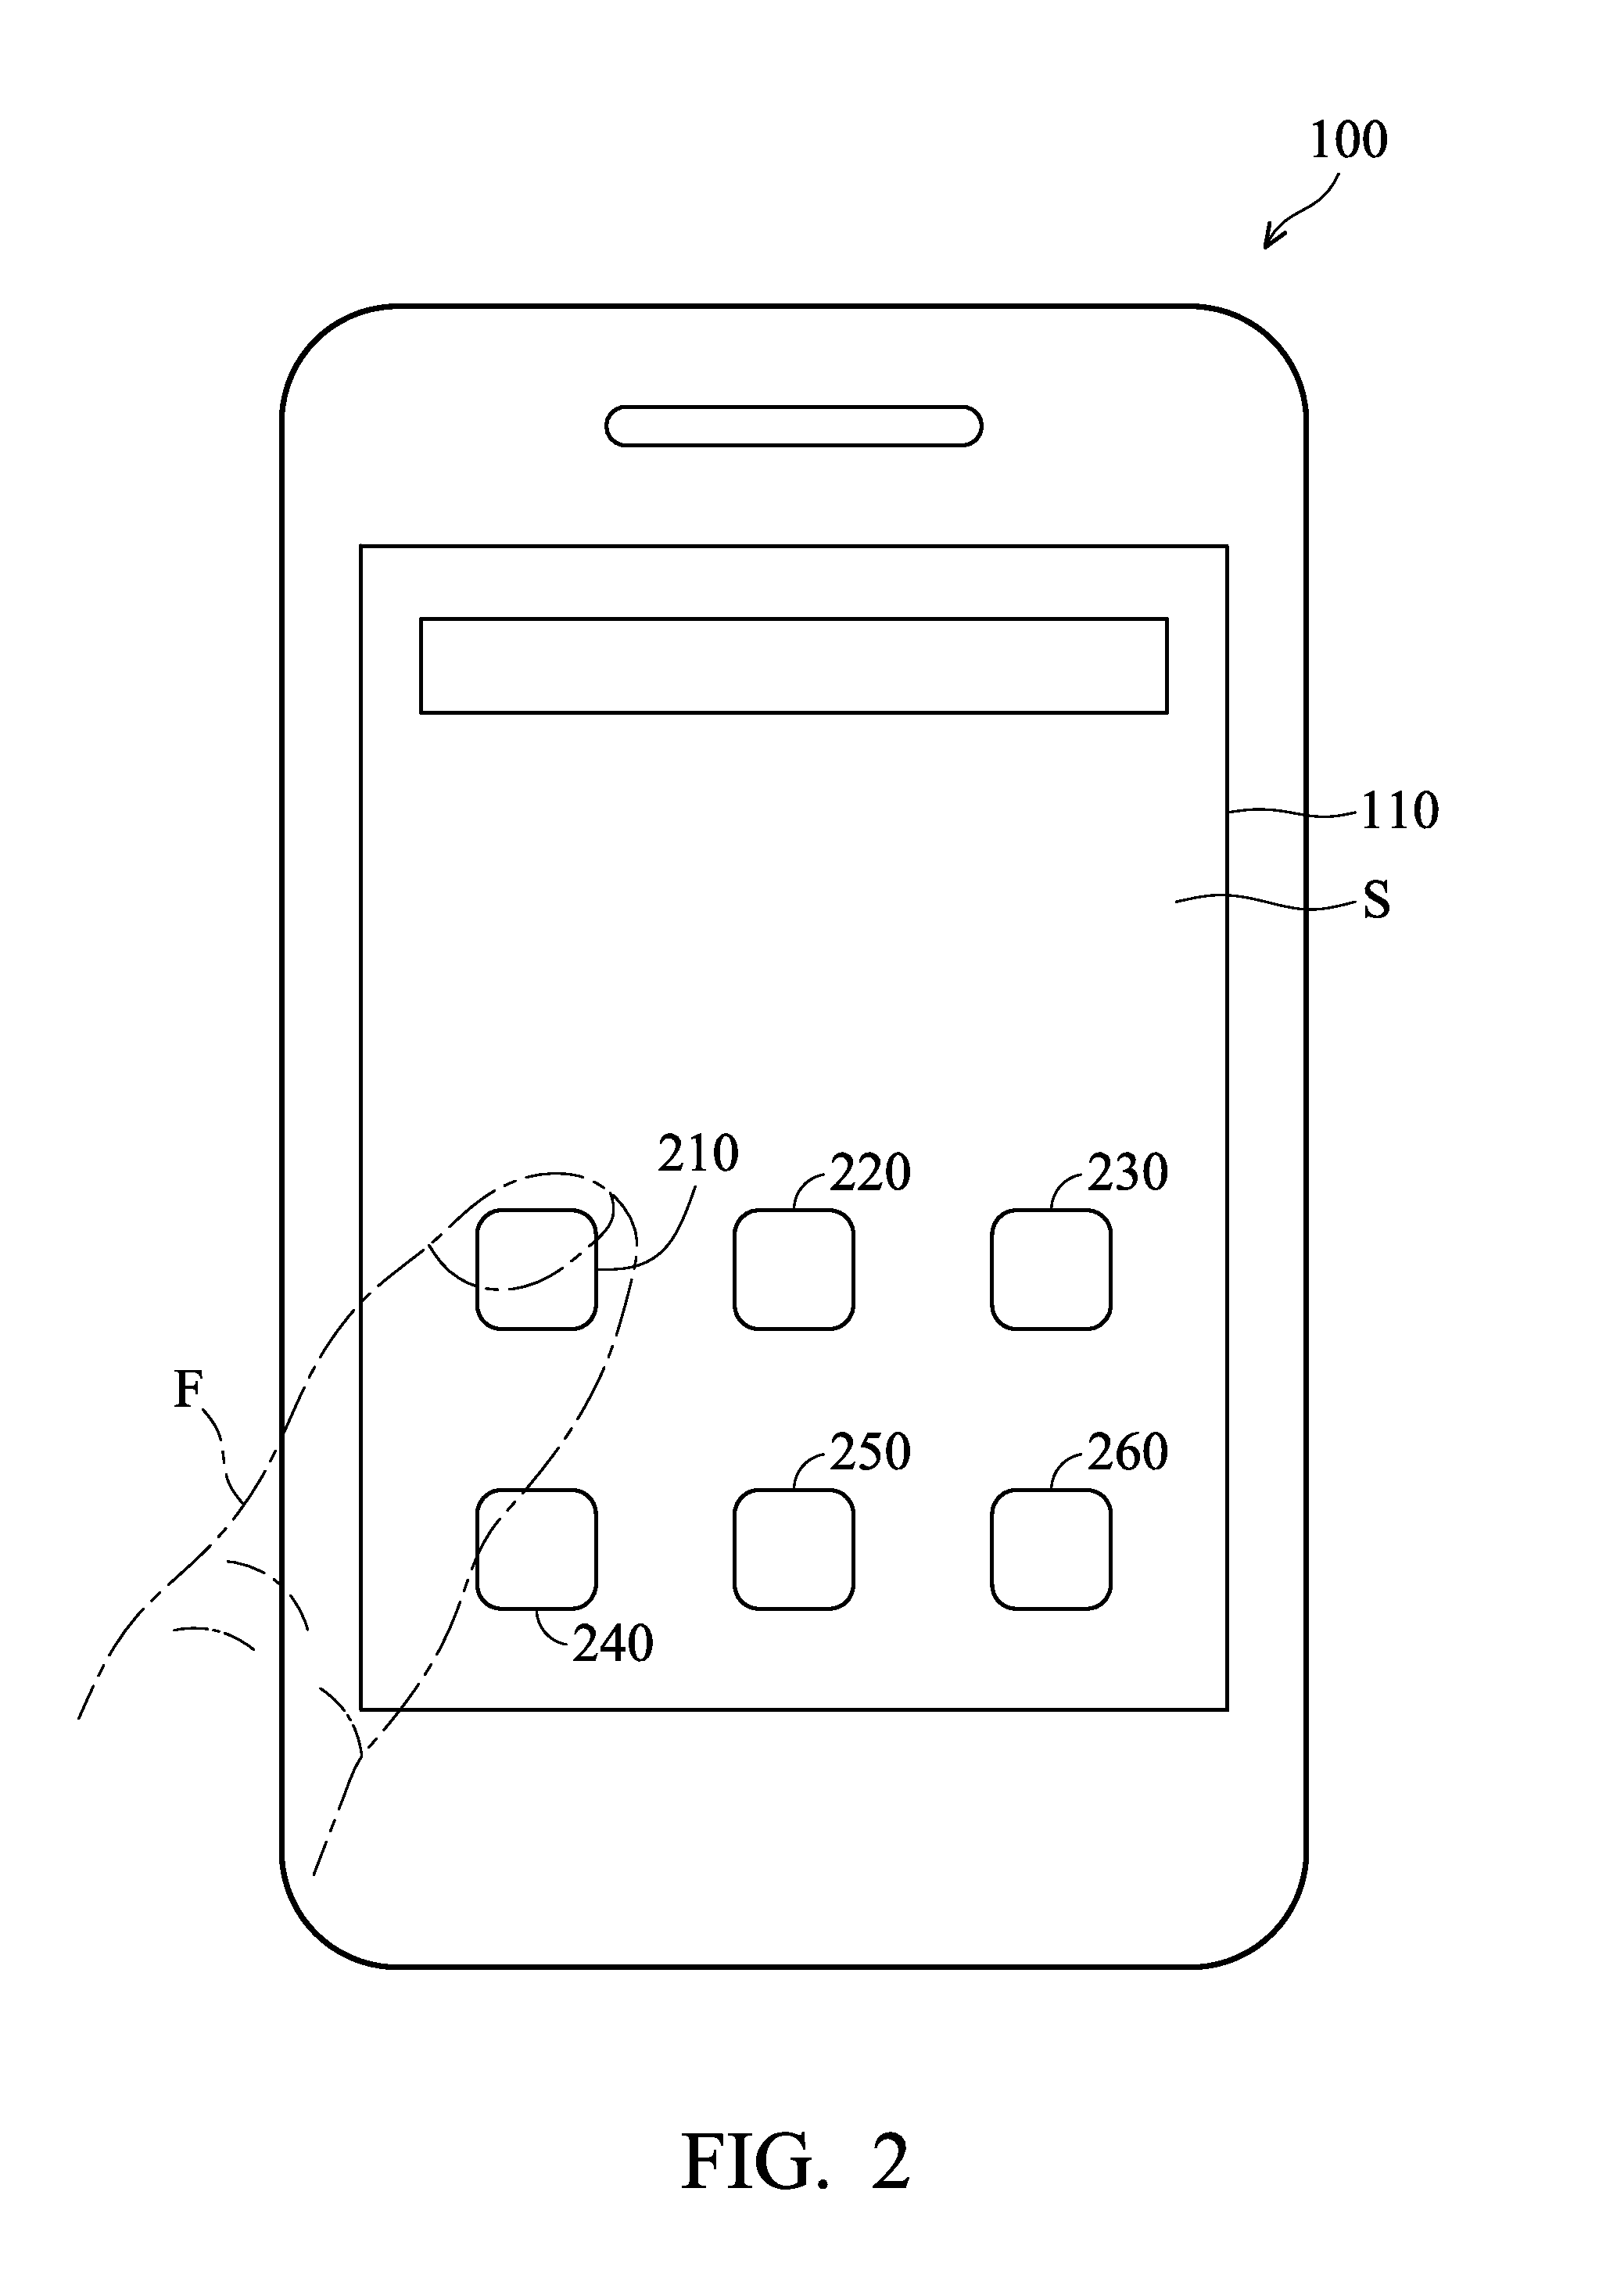 Electronic device with touch screen for fingerprint recognition